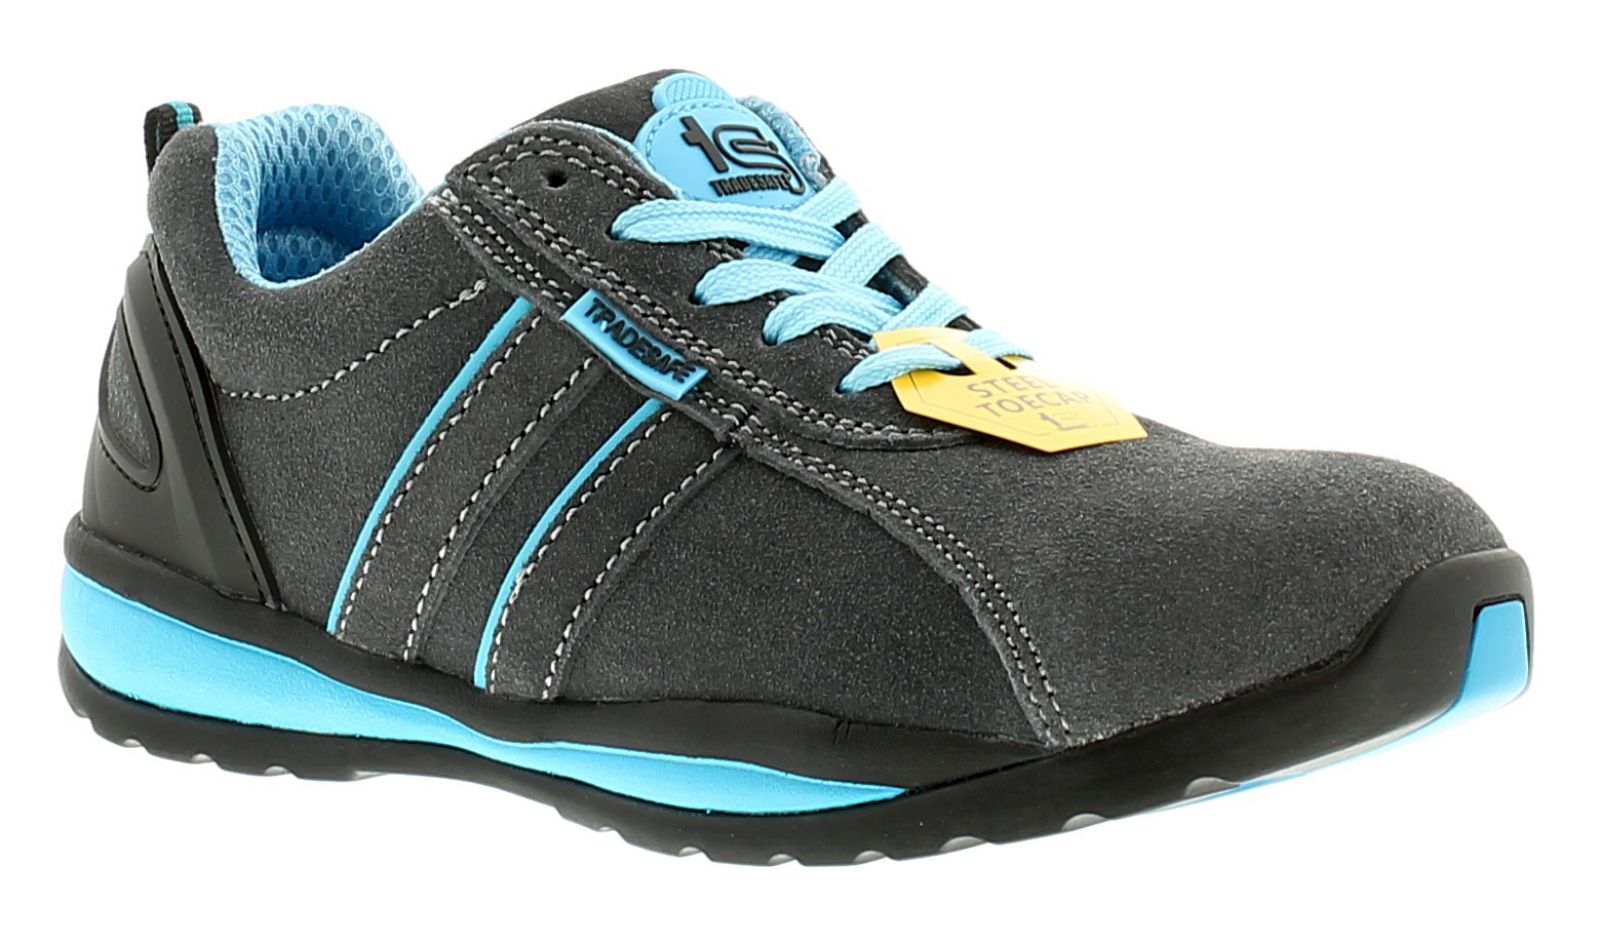 New Ladies/Womens Grey/Blue Tradesafe Barge Lace Ups Safety Shoes.